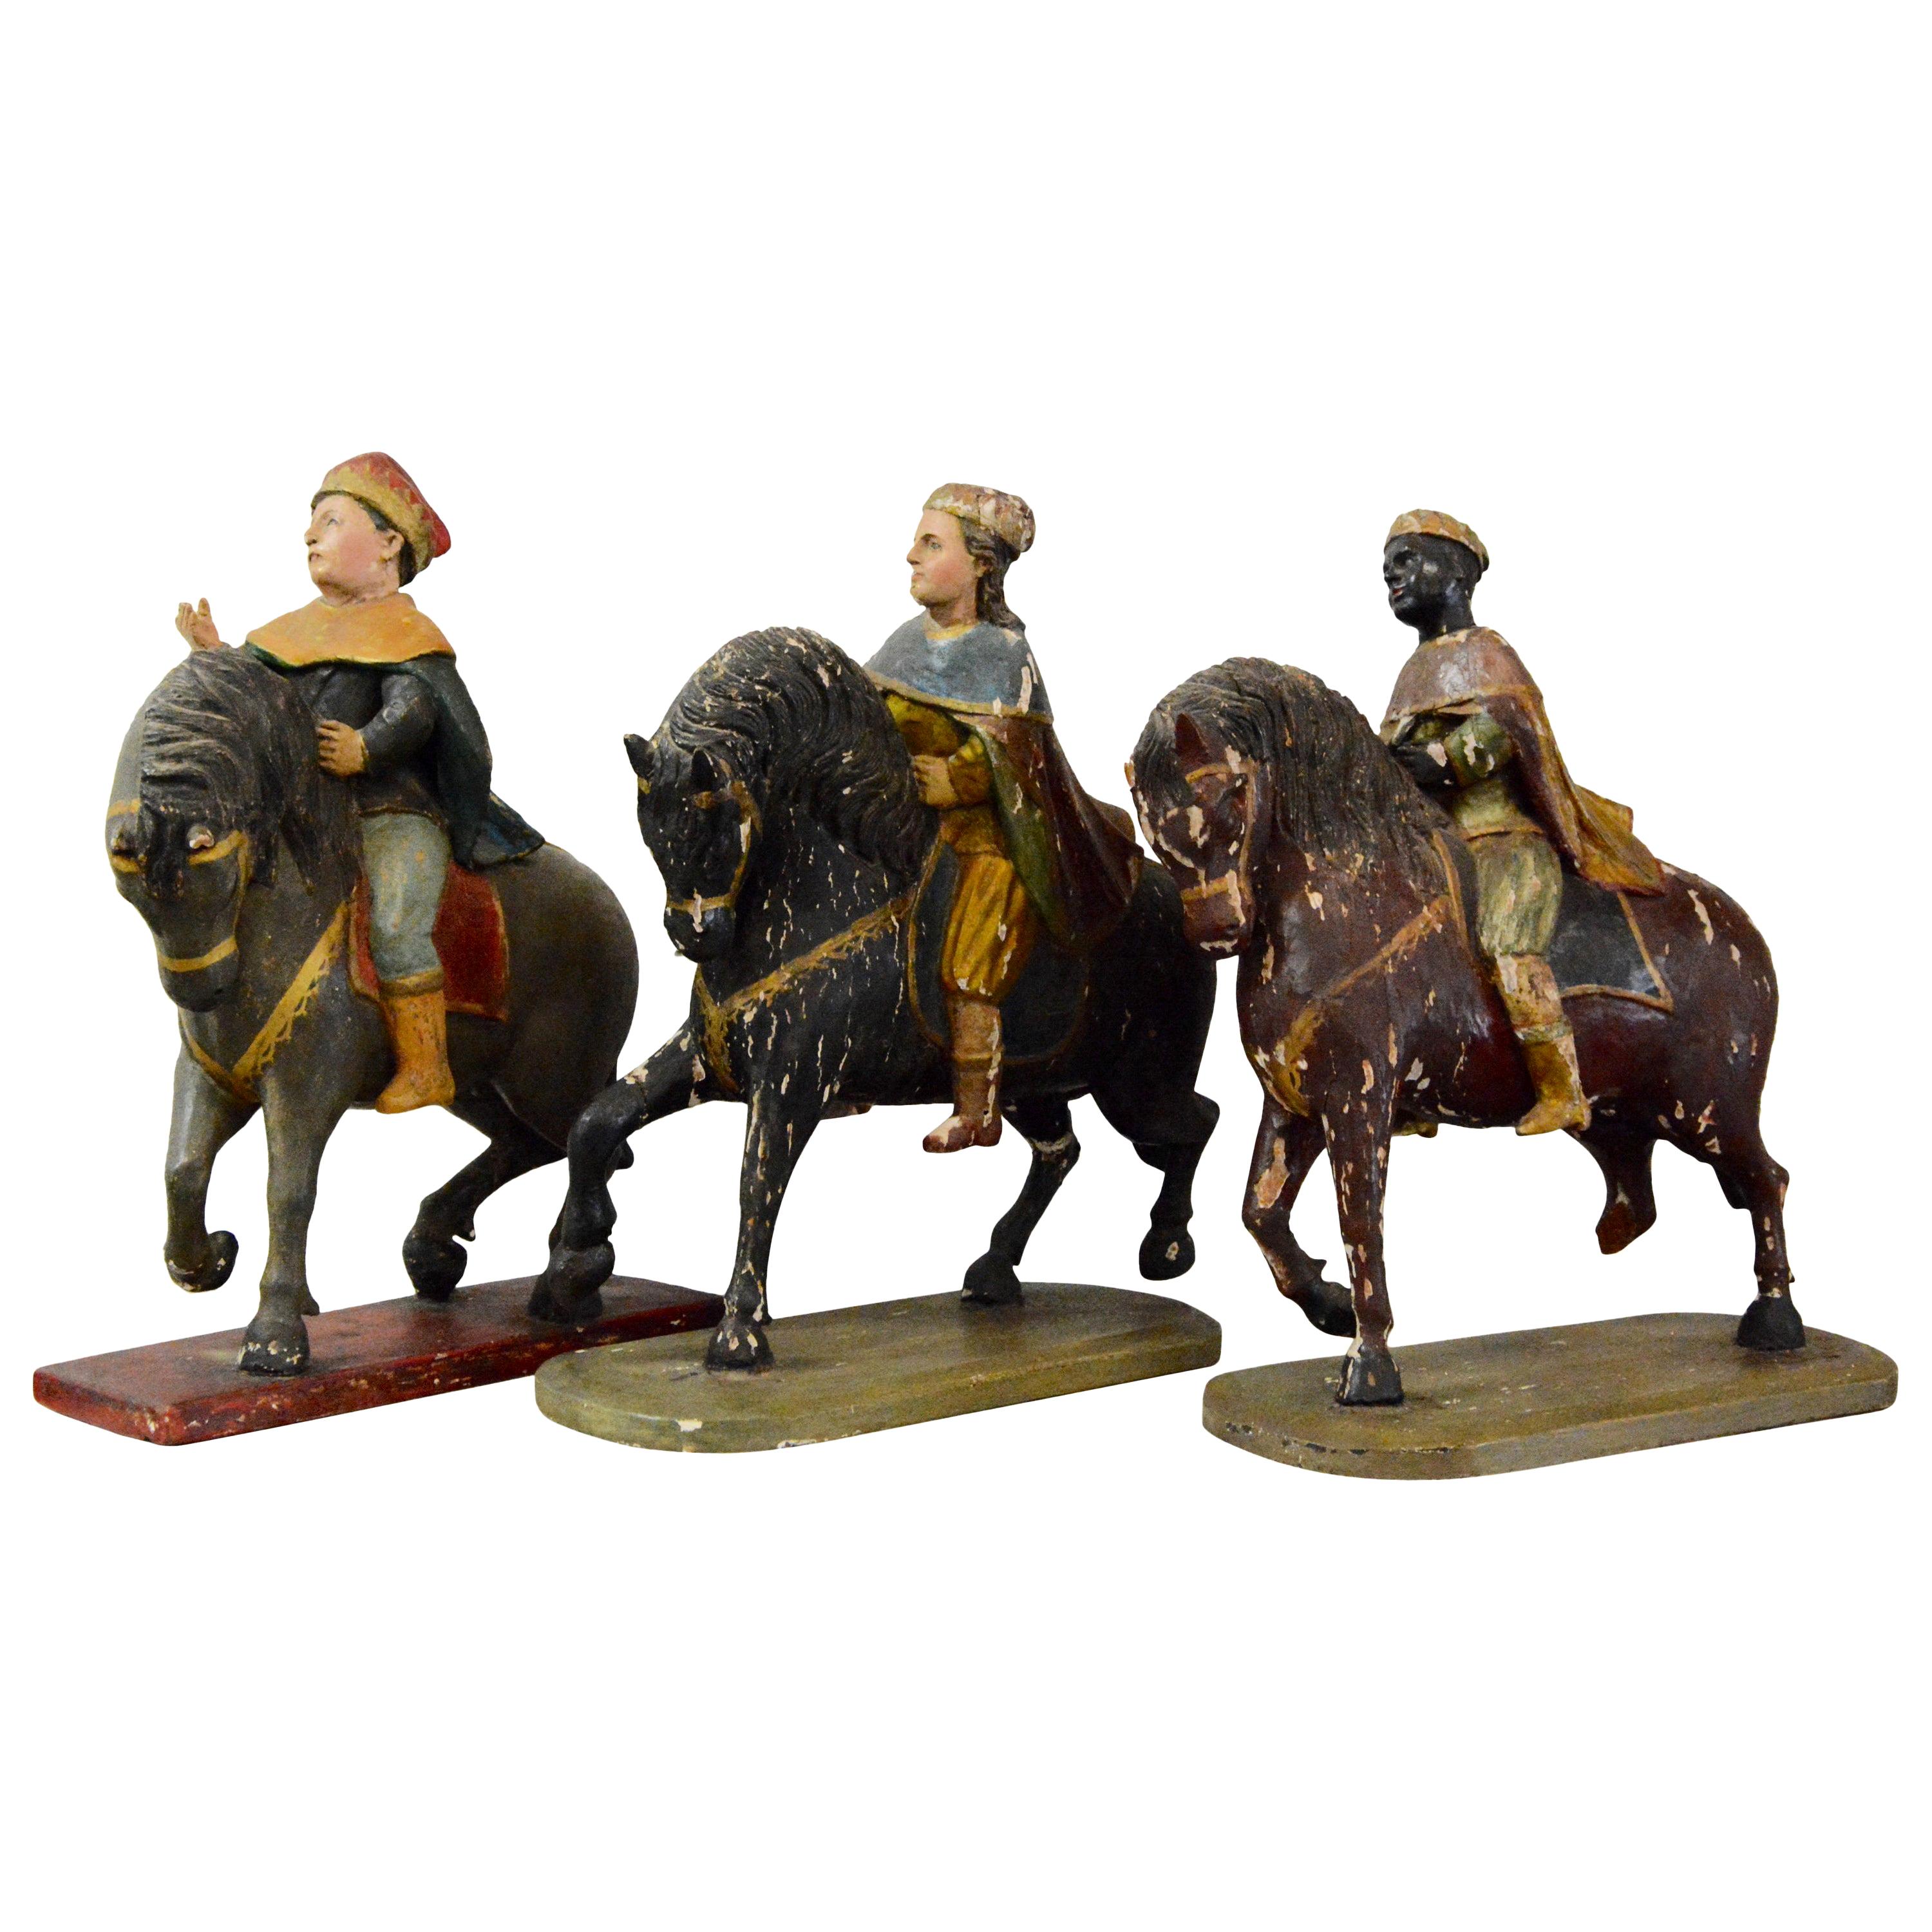 Three Wise Men 18th Century Carved Figures For Sale